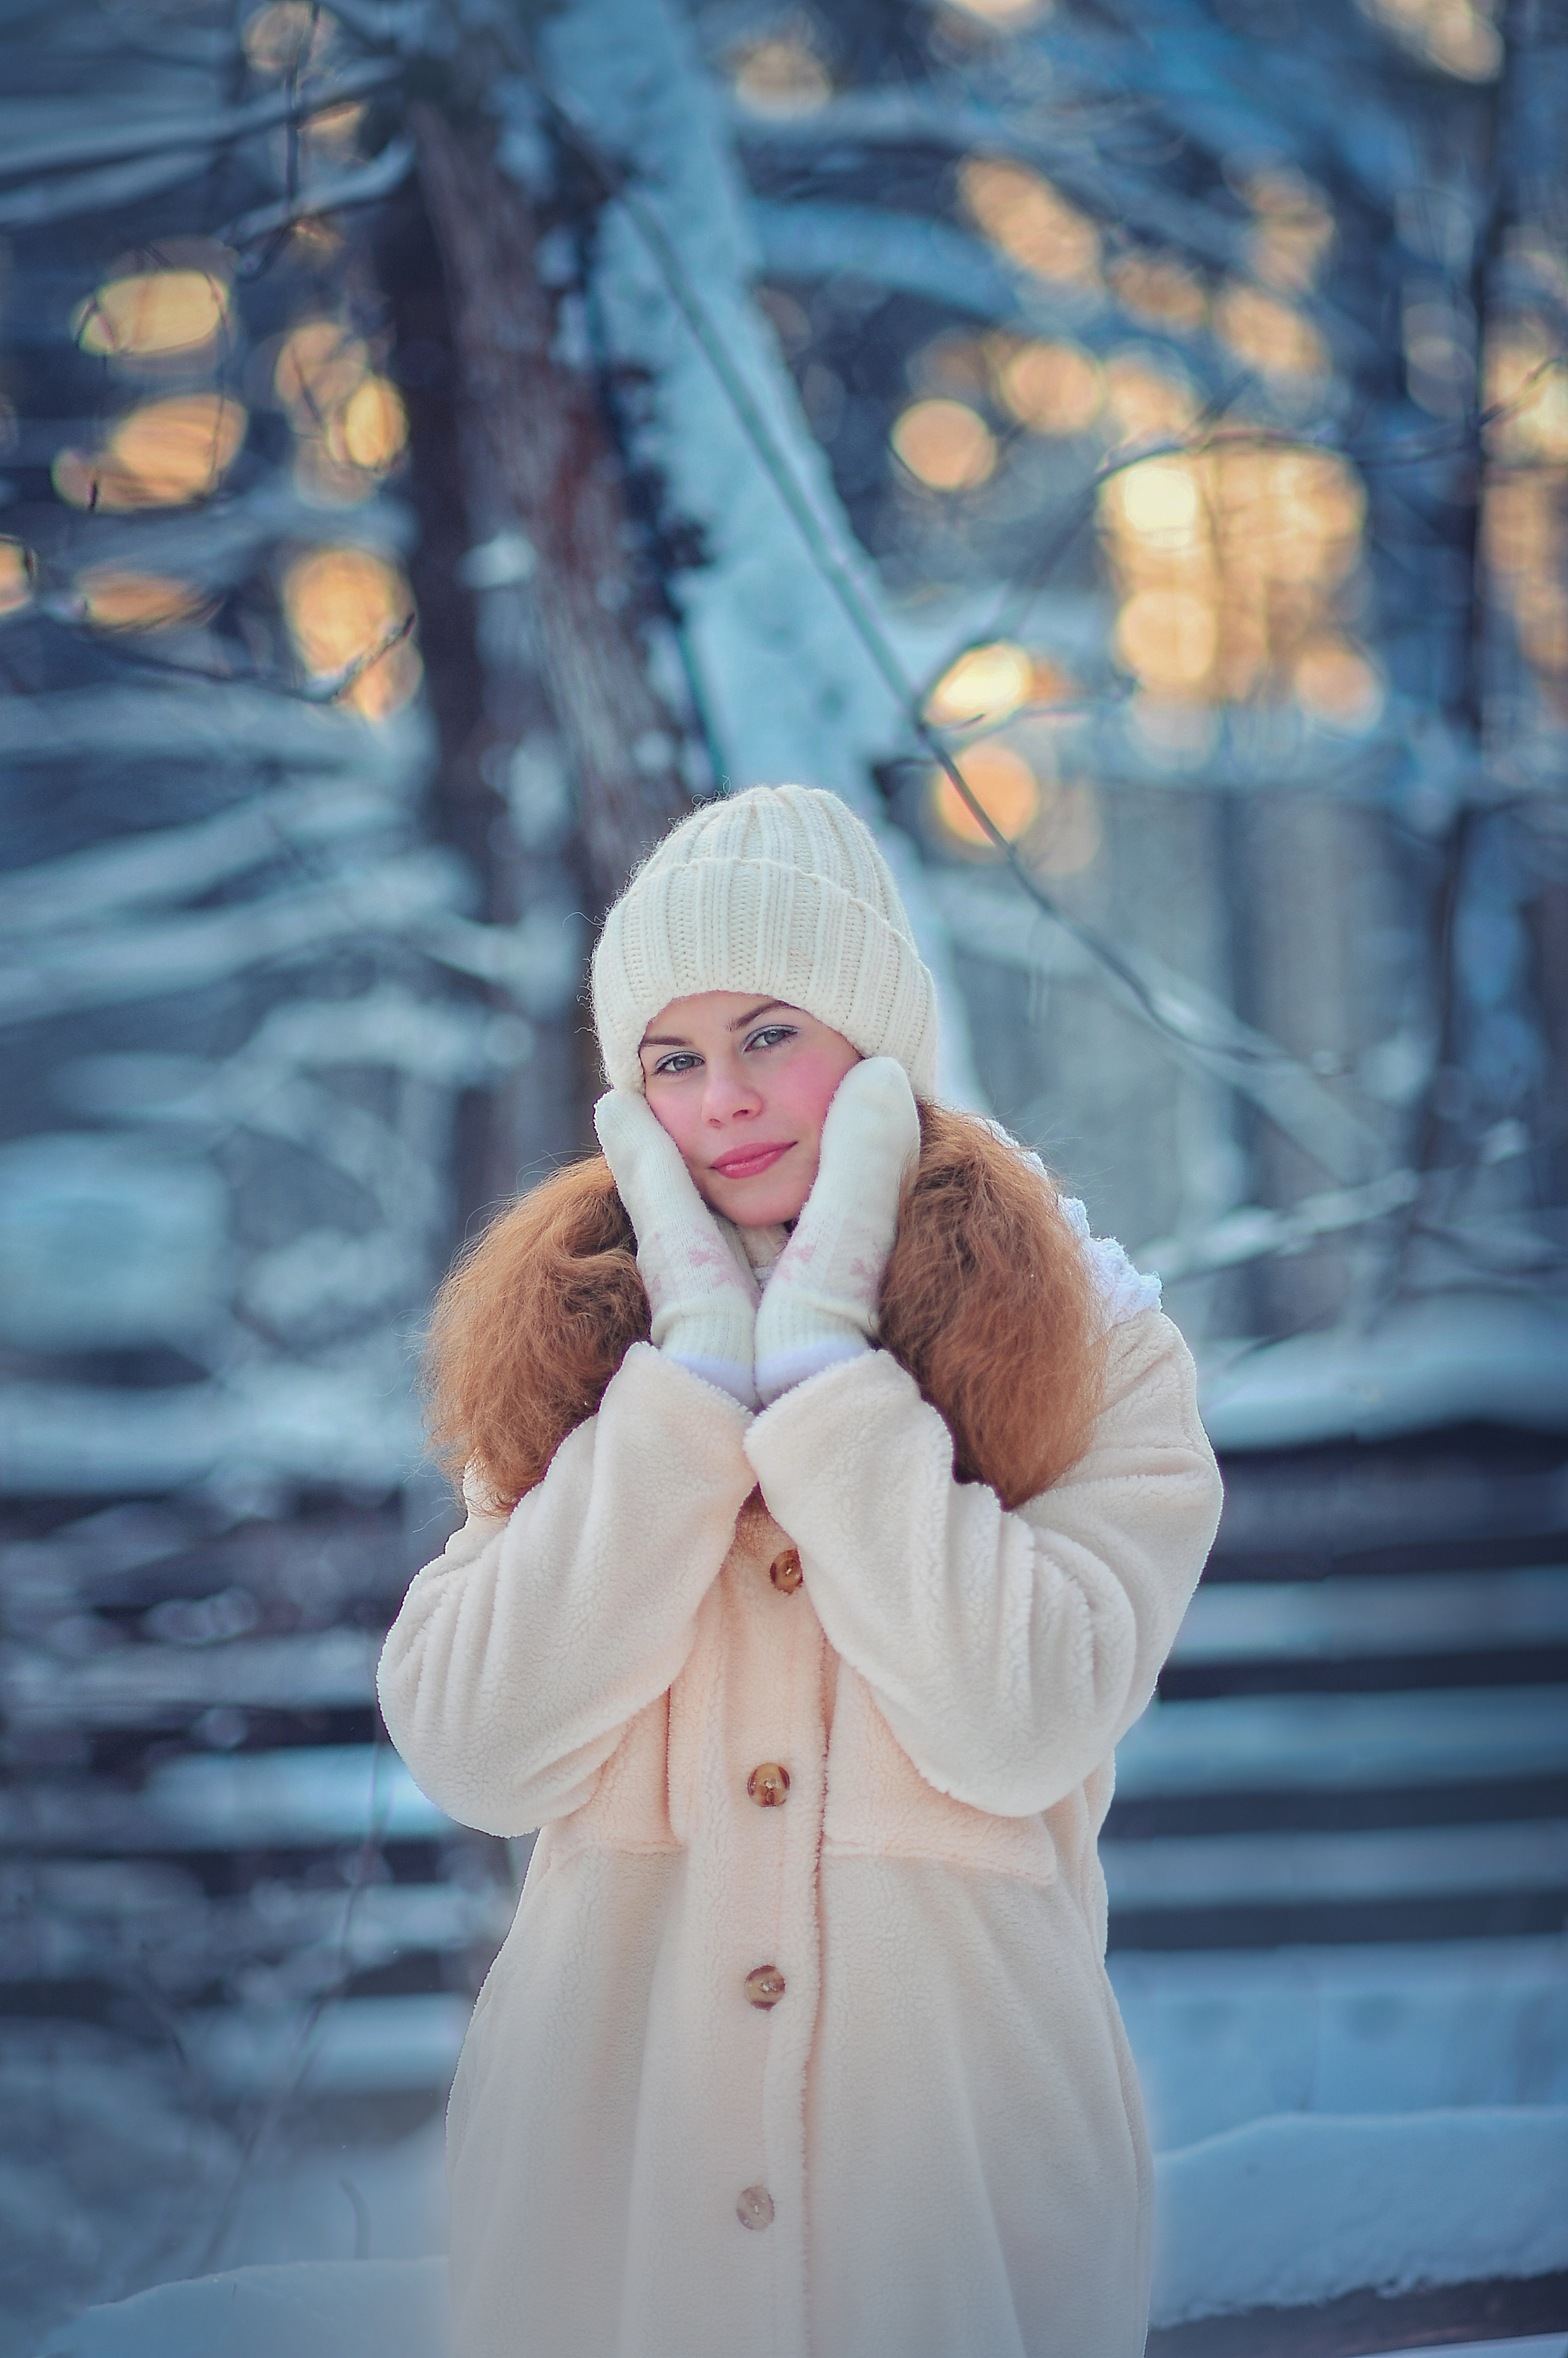 People 2328x3500 women model brunette long hair women outdoors winter cold portrait display snow coats gloves hat looking at viewer